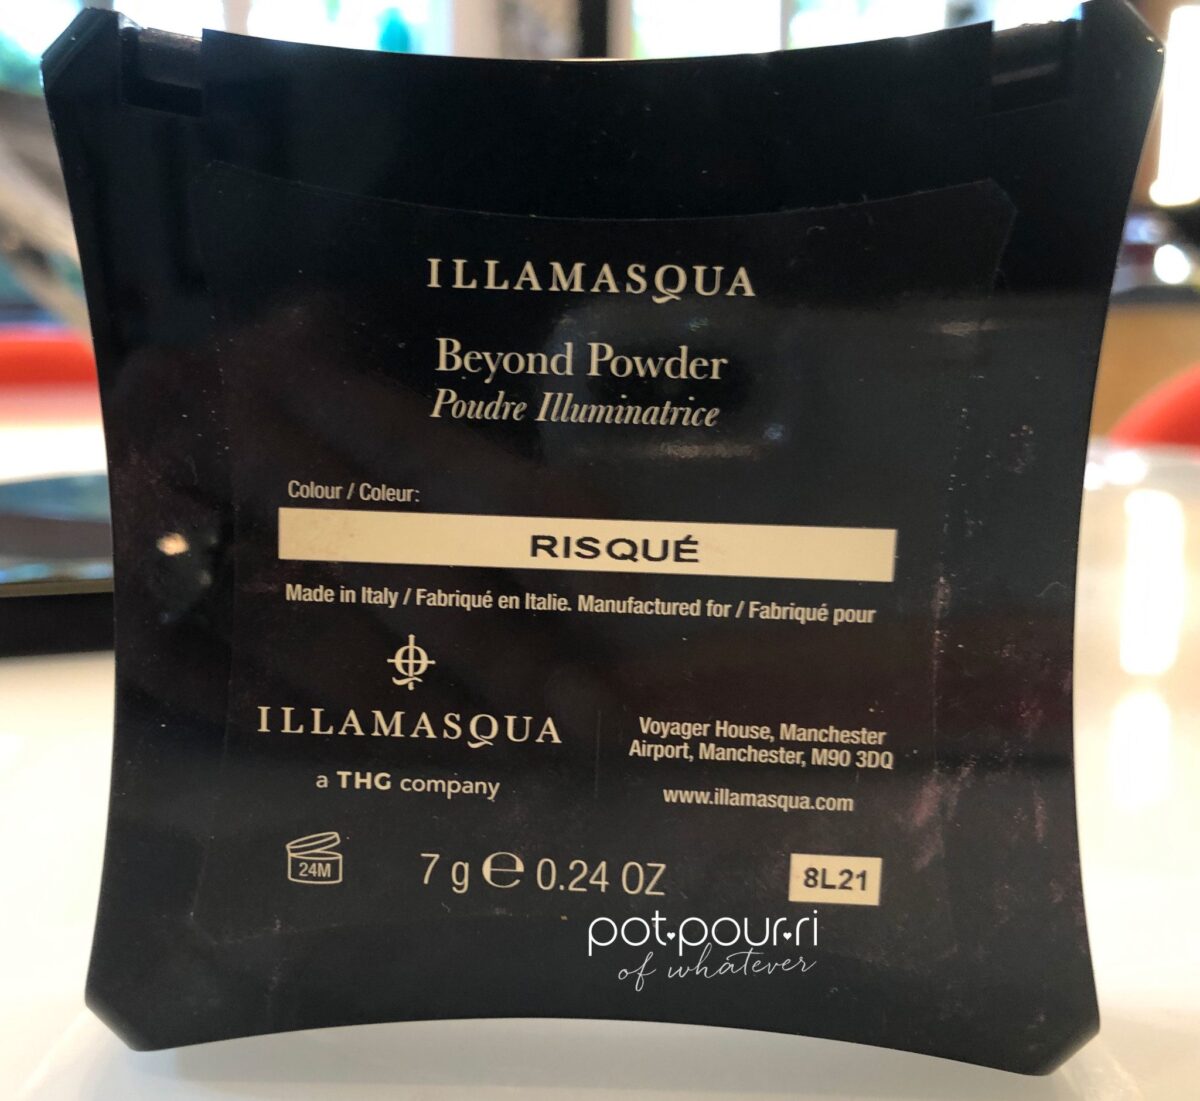 THE BACK OF THE ILLAMASQUA RISQUE BEYOND POWDER COMPACT